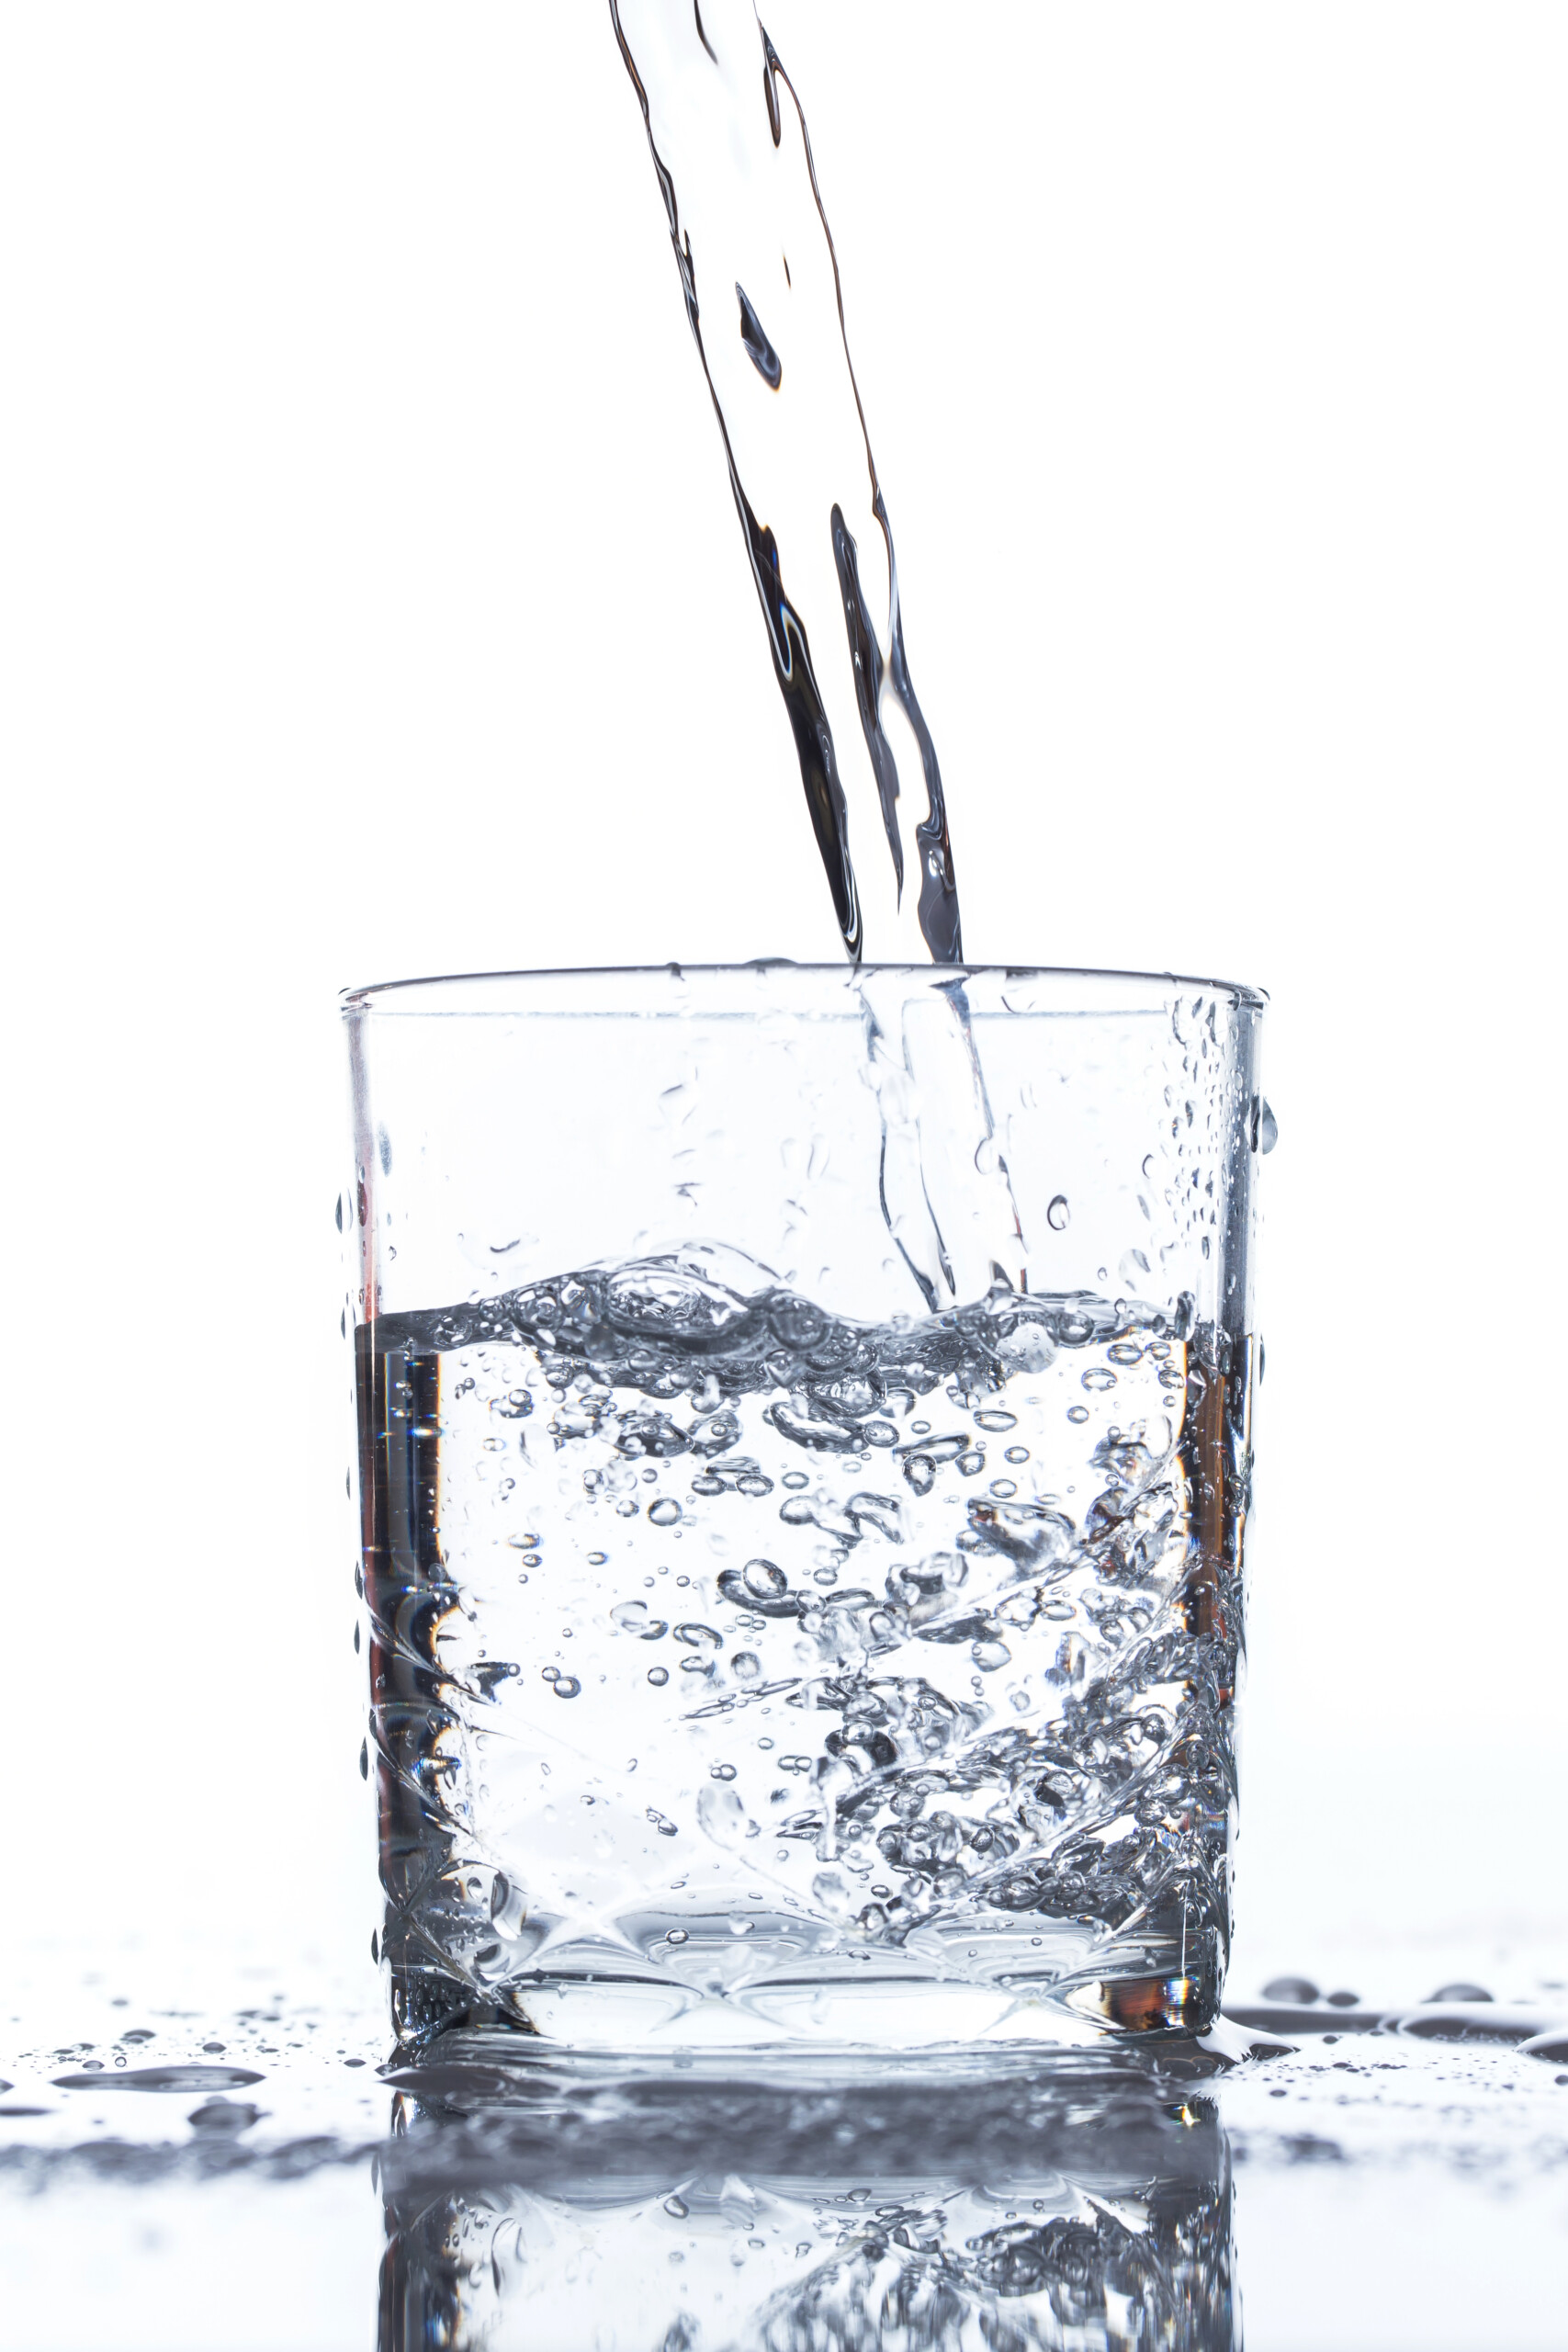 Can Binge Eating Lead to Dehydration?